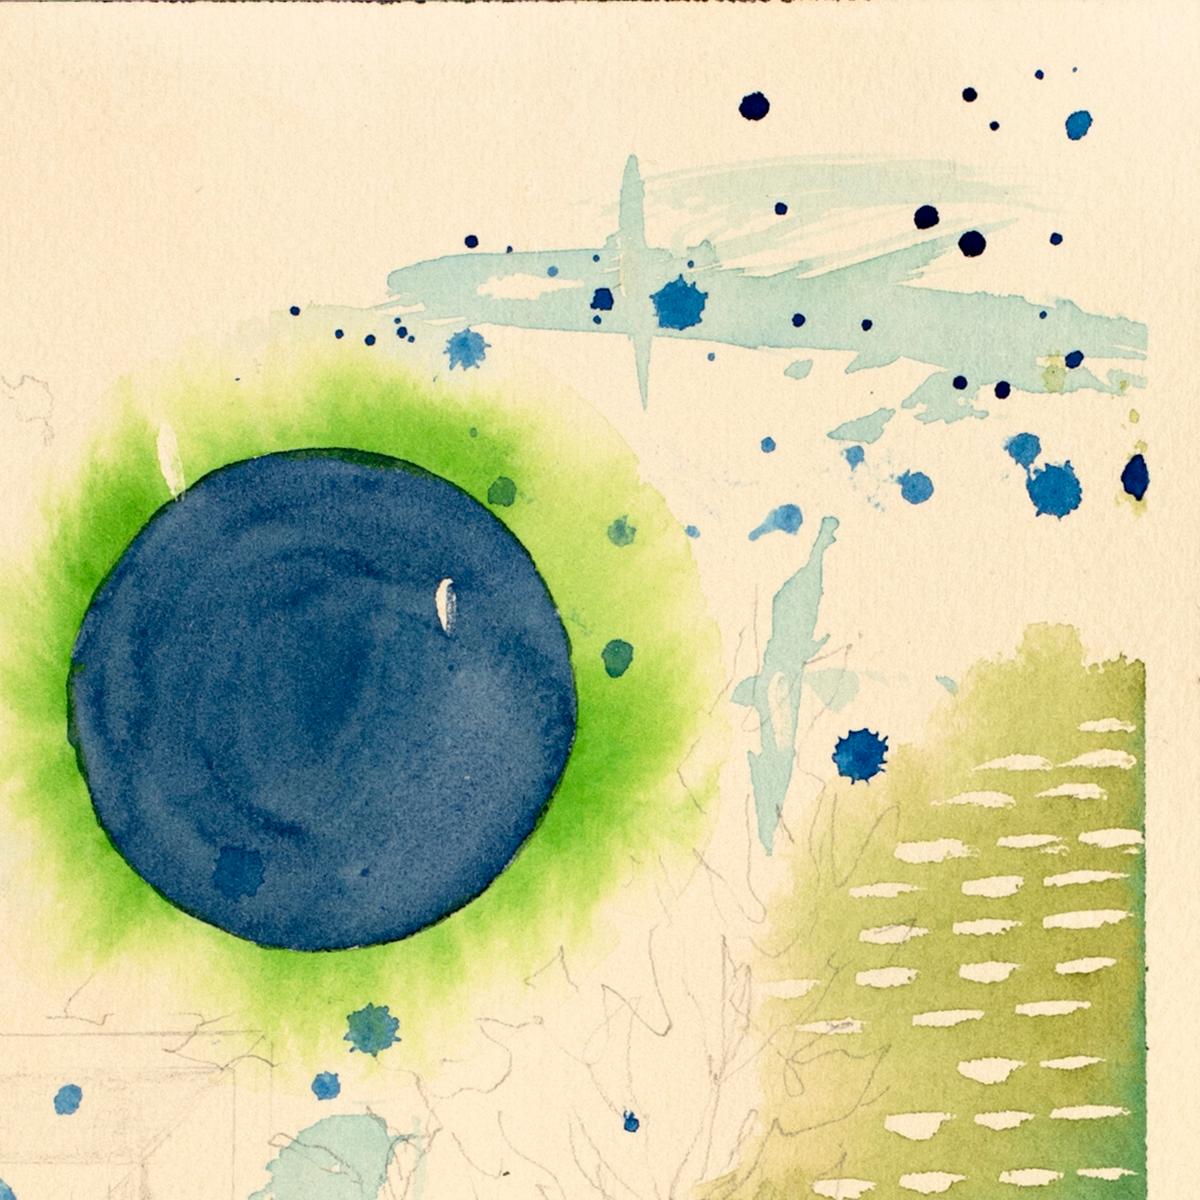 Green Universe by Lori Fox. Green and blue hues watercolor and graphite on paper im Angebot 3